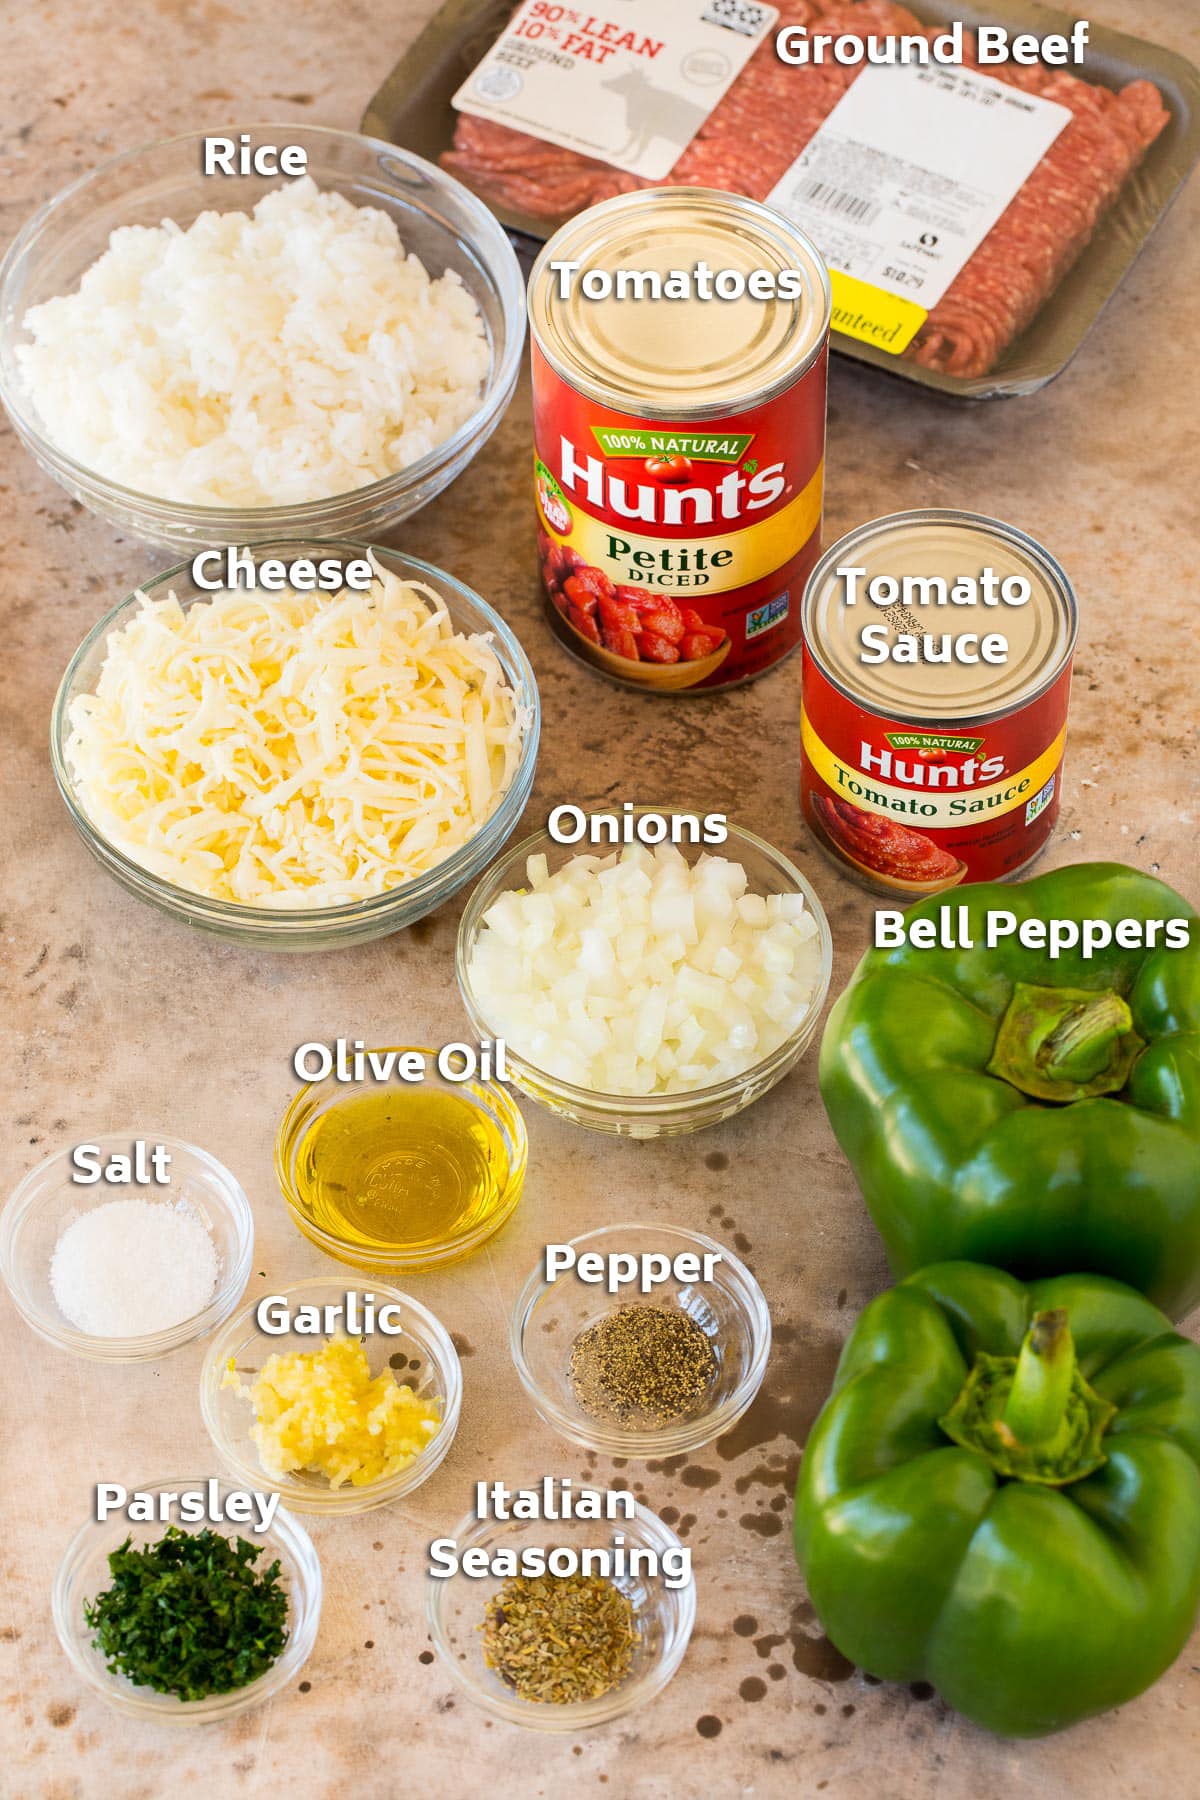 Ingredients including green peppers, rice, meat, cheese and seasonings.